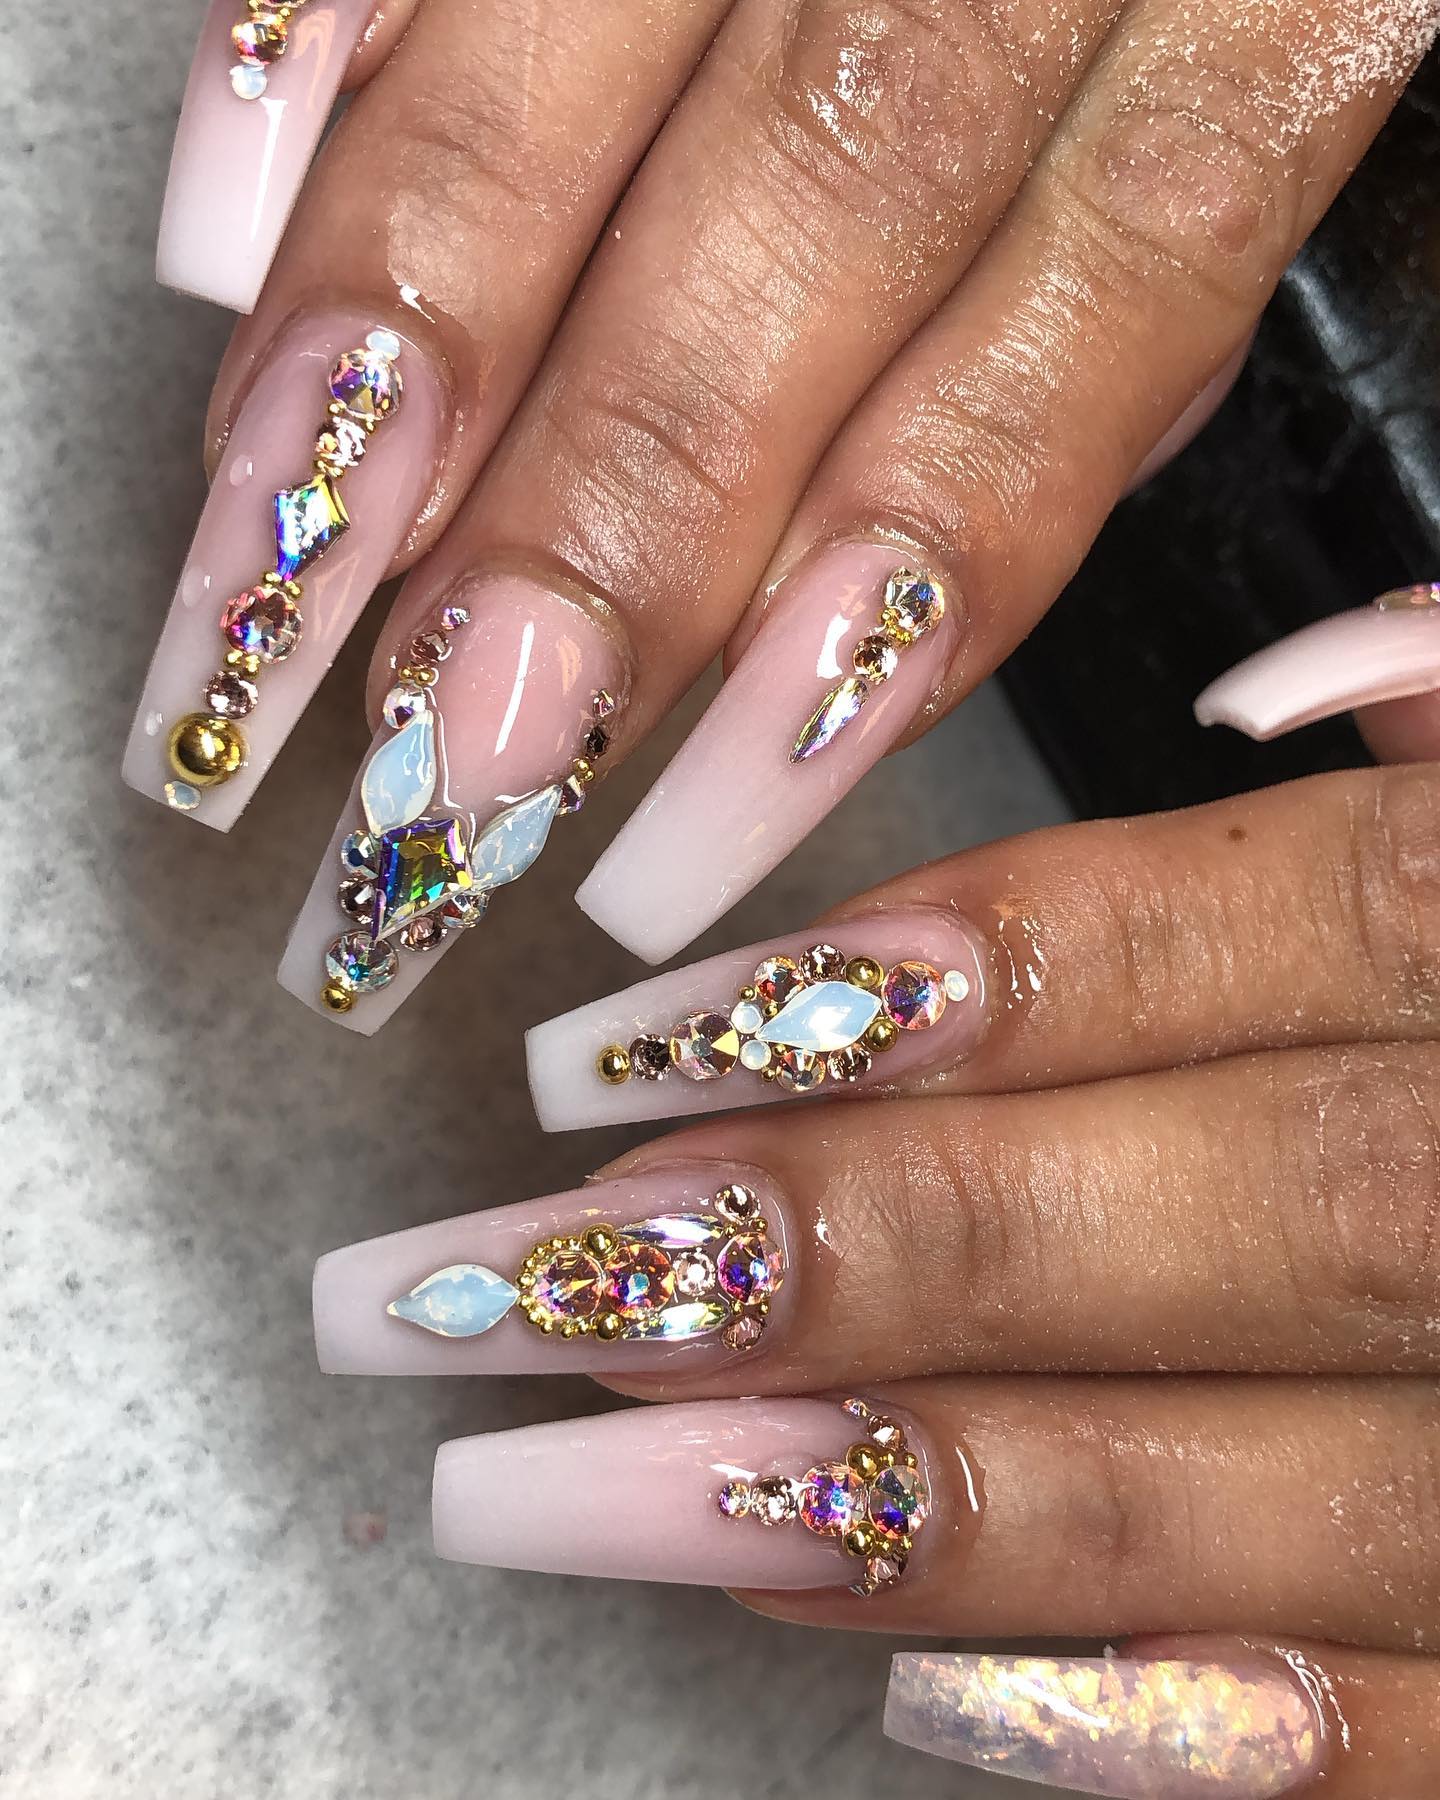 If you are a woman who always wants to get more of everything, this pink and white ombre nail design is definitely for you. For your long square ombre nails, let's add shiny and colorful gems to show everyone that you are a true princess.